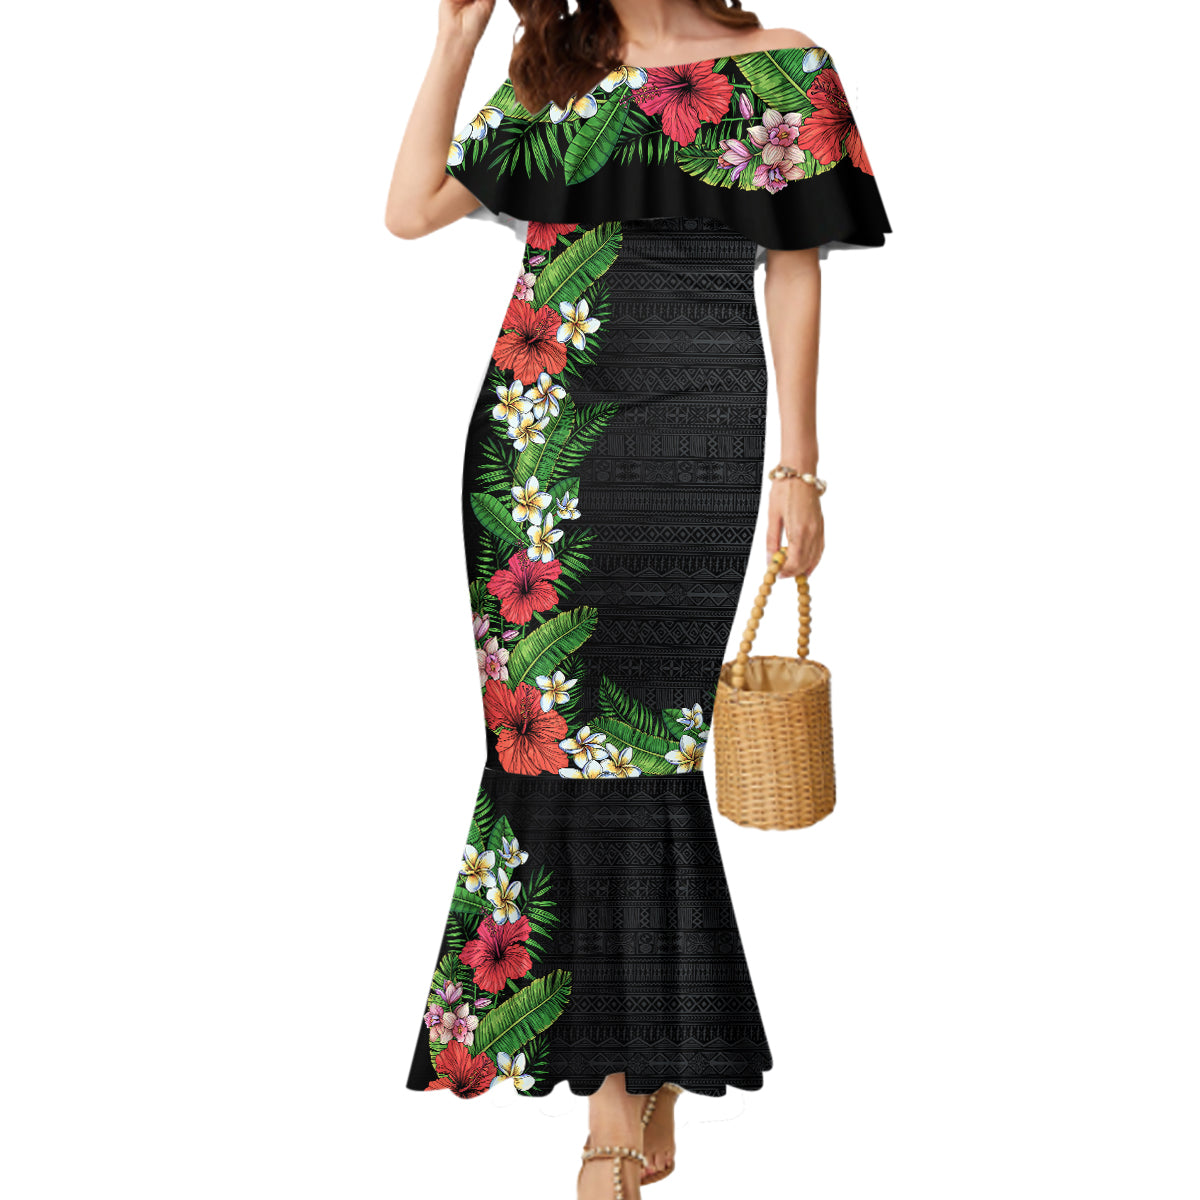 Hawaii Tropical Flowers and Leaves Mermaid Dress Tapa Pattern Colorful Mode